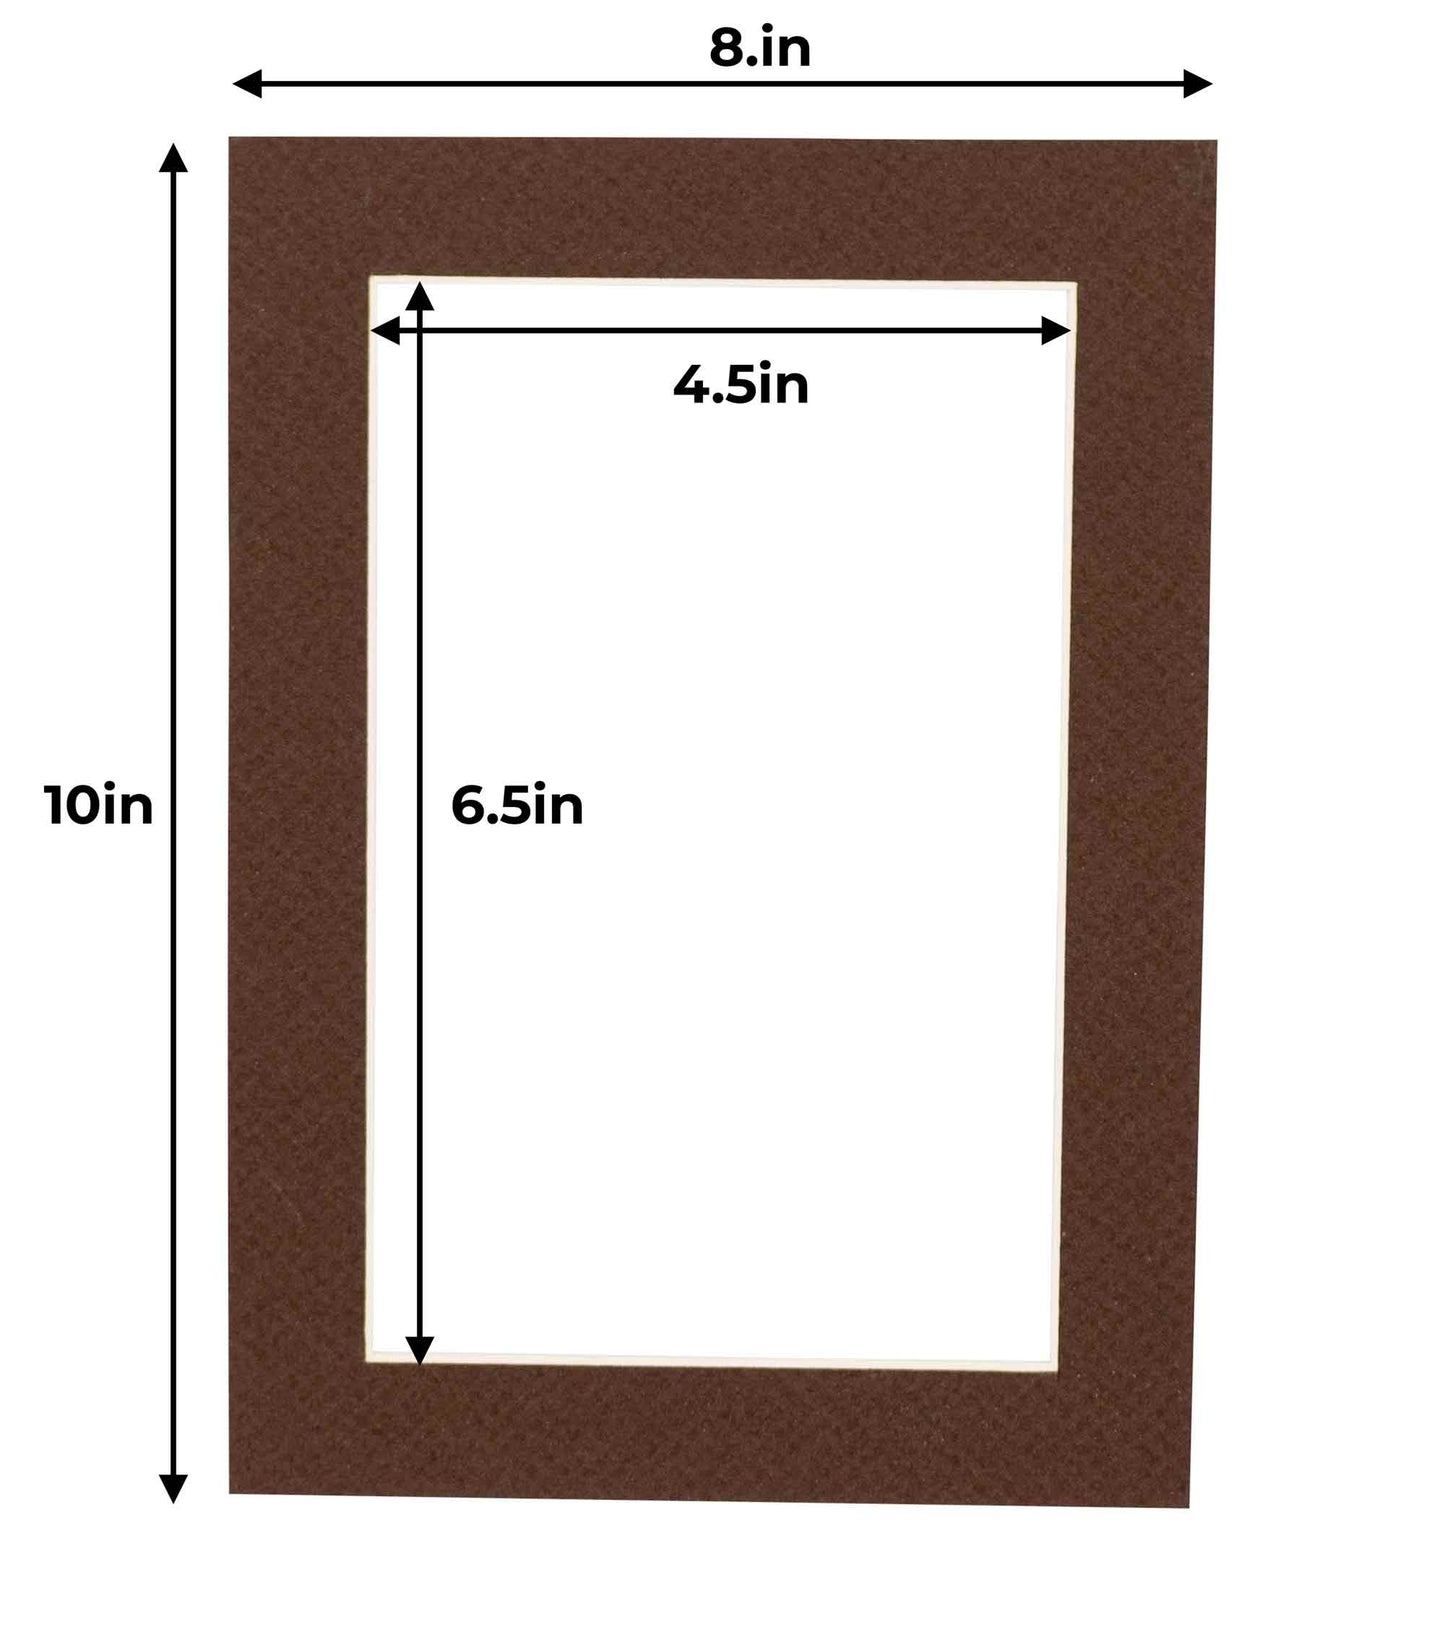 Pack of 25 Chocolate Brown Precut Acid-Free Matboard Set with Clear Bags & Backings